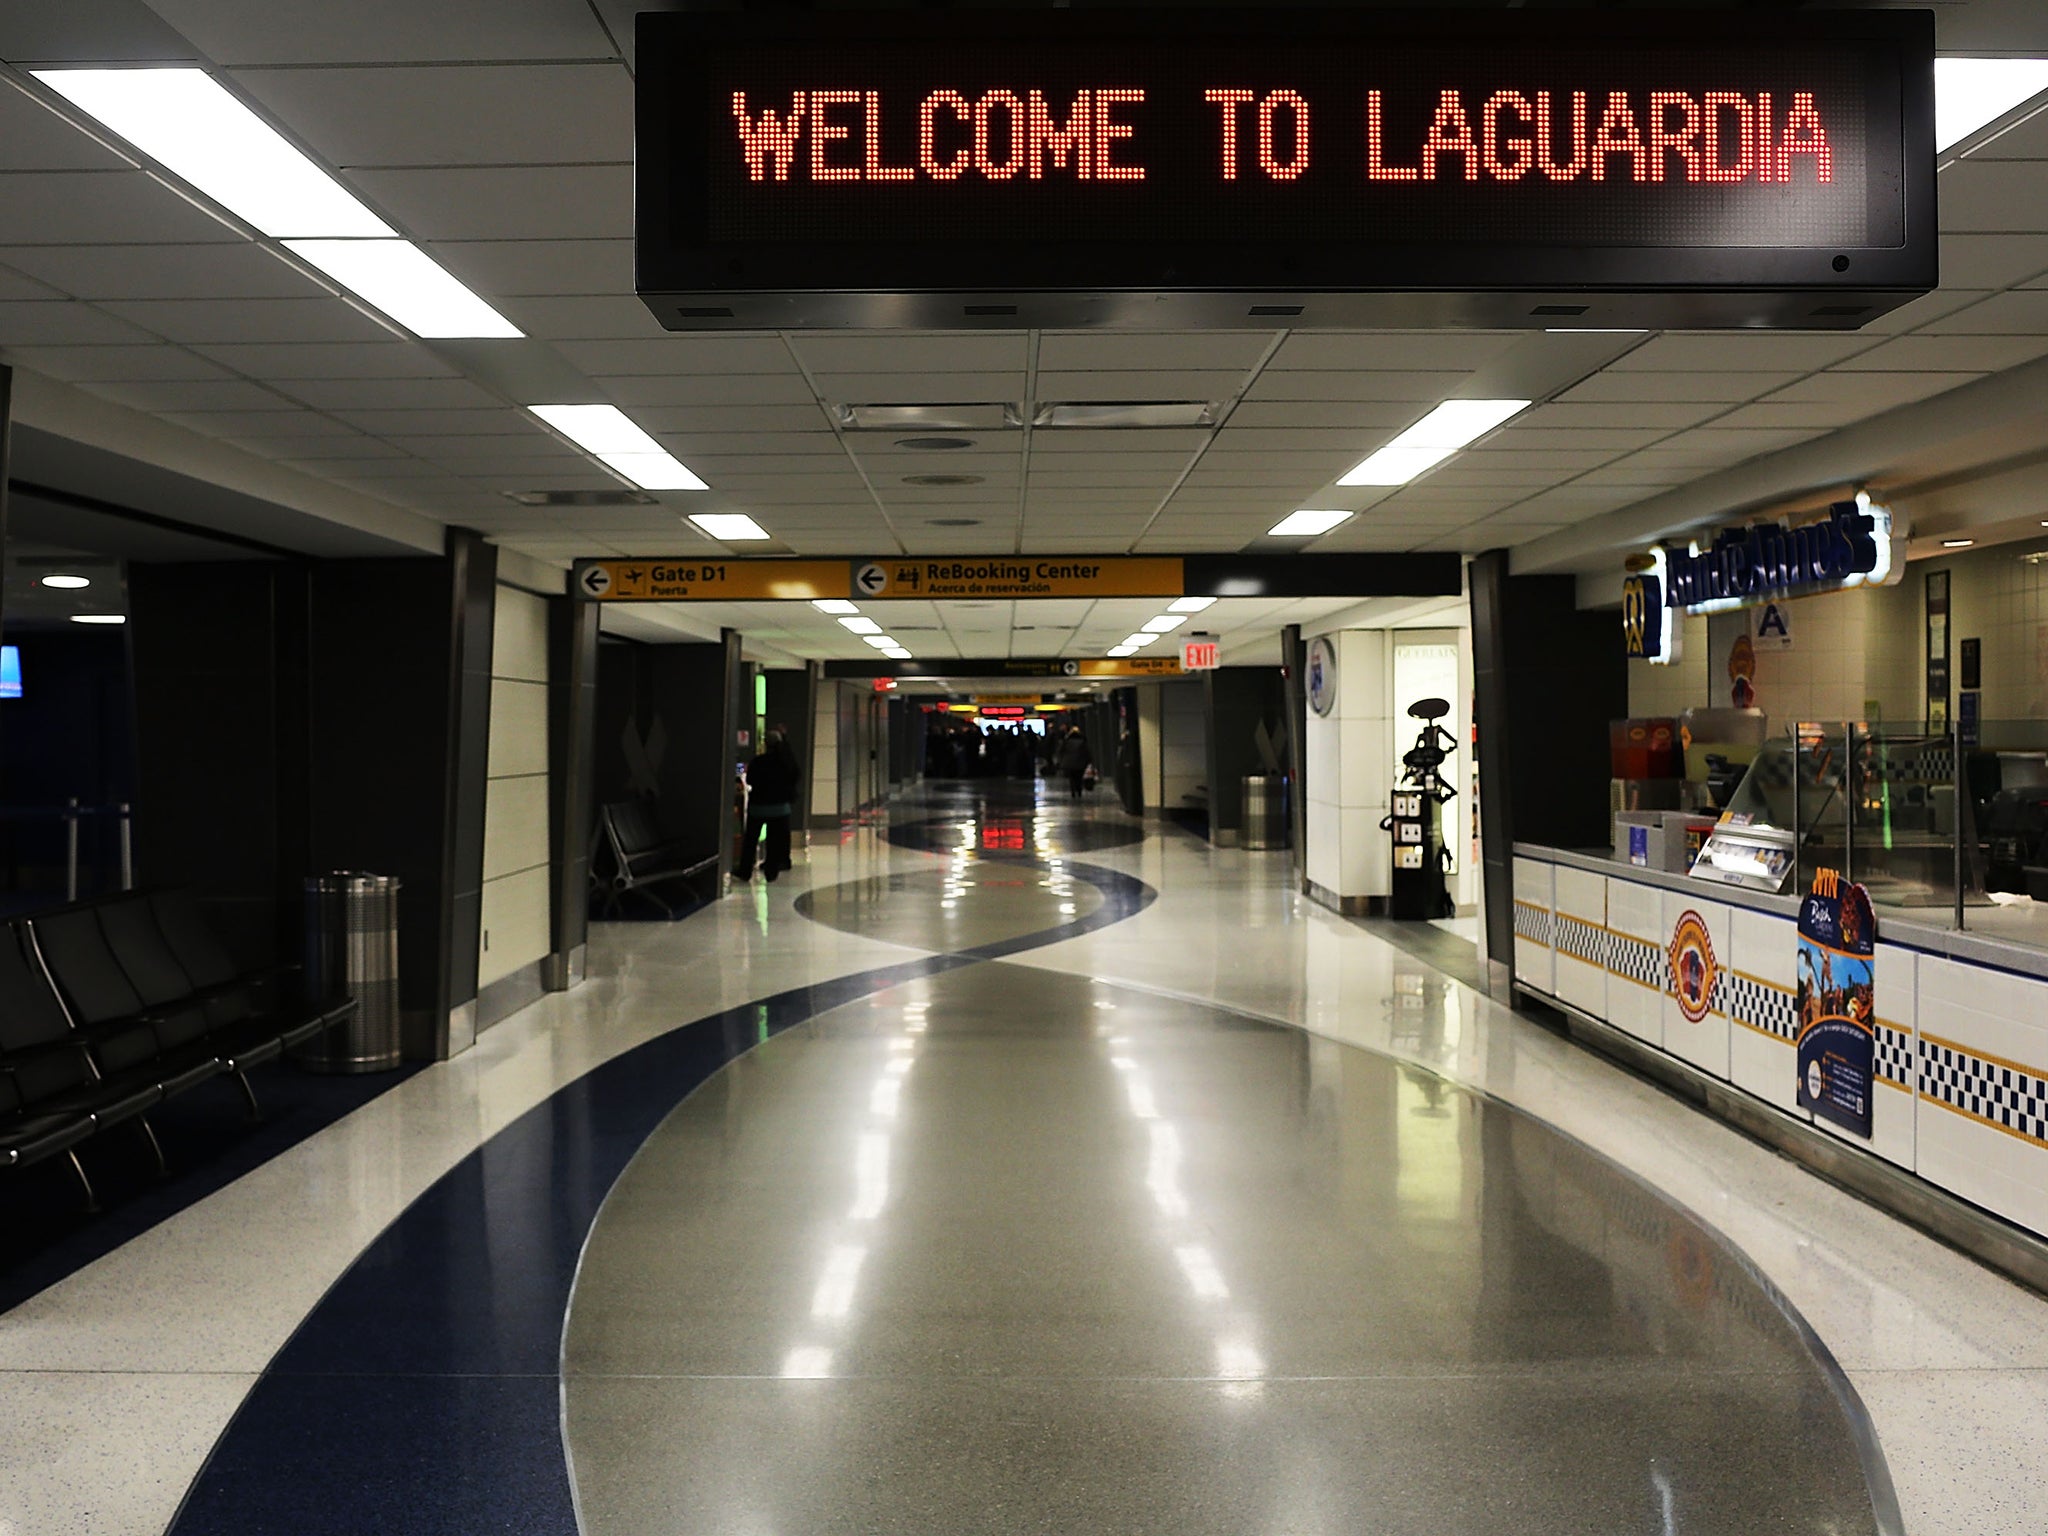 The cleaners walked out of New York's LaGuardia Airport amid fears that they have too little protection from ebola